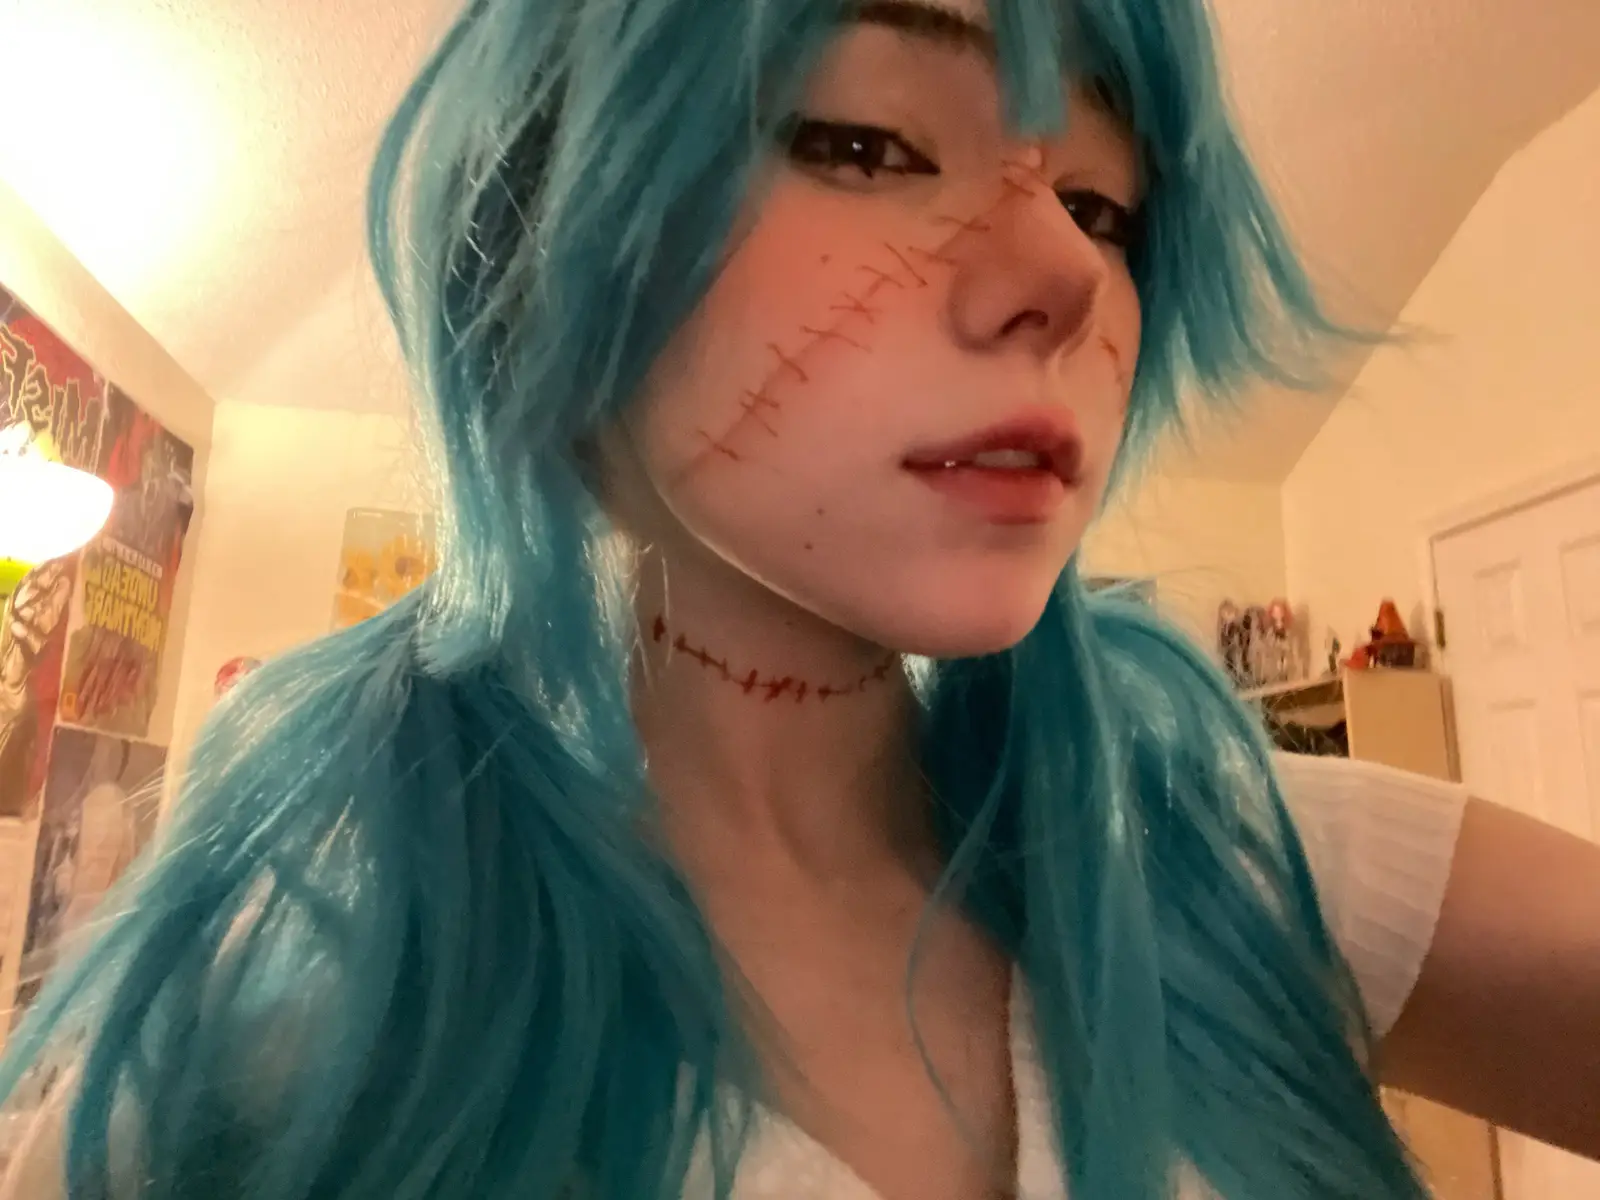 last one i just spent so long on the makeup #oc #originalcharacter #occosplay #originalcharactercosplay #altmakeup #altgirl #cosplay #cosplayer #fyp #foryou #foryoupage #fypツ #fypage 